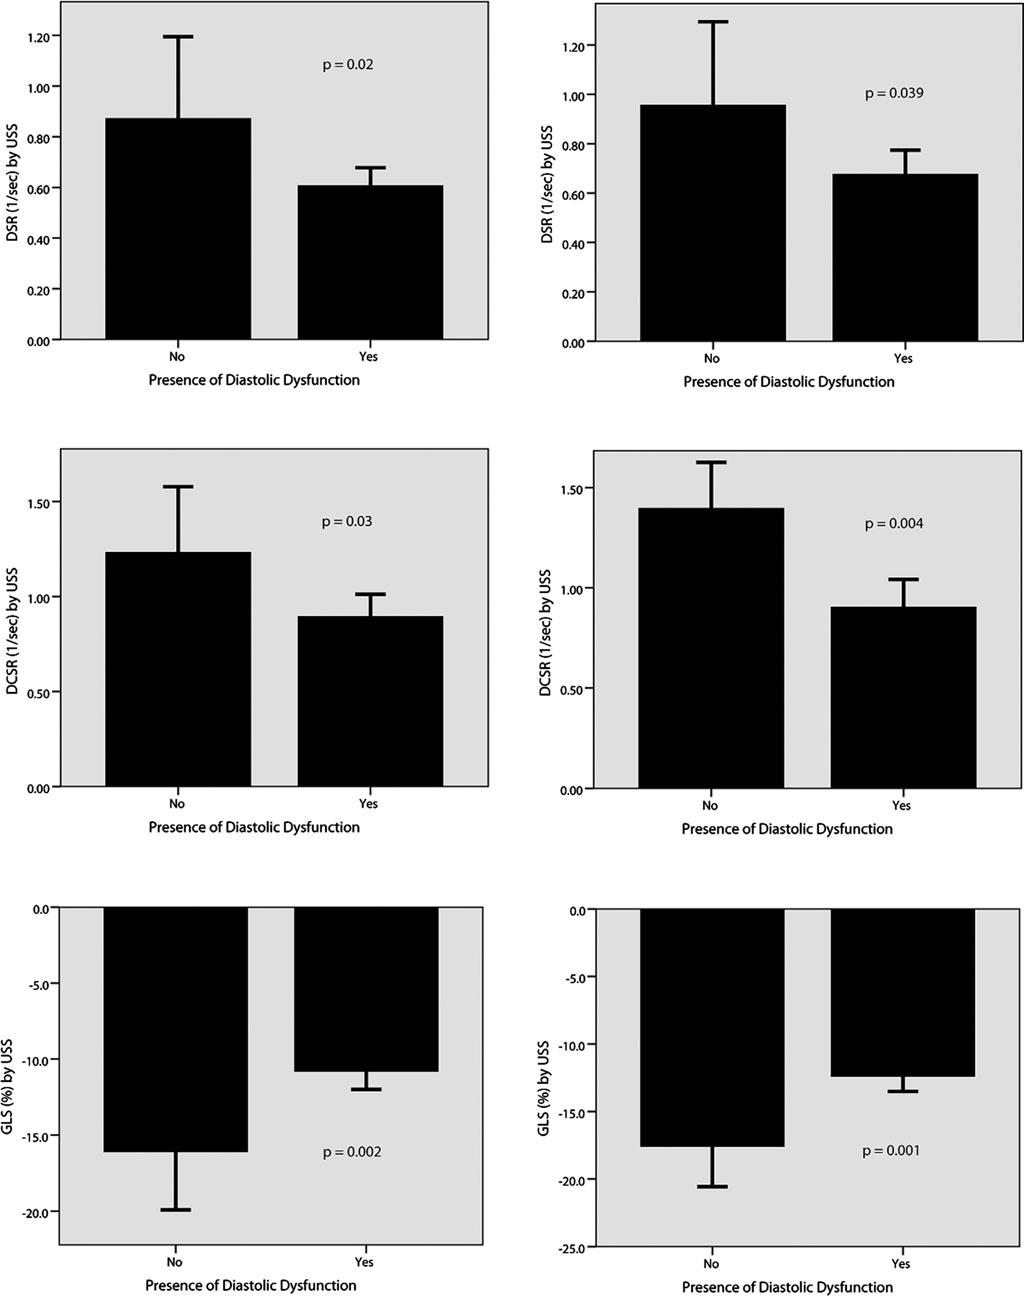 Kolias, et al. Figure 4. Comparison of strain and strain rate parameters in patients with and without diastolic dysfunction.